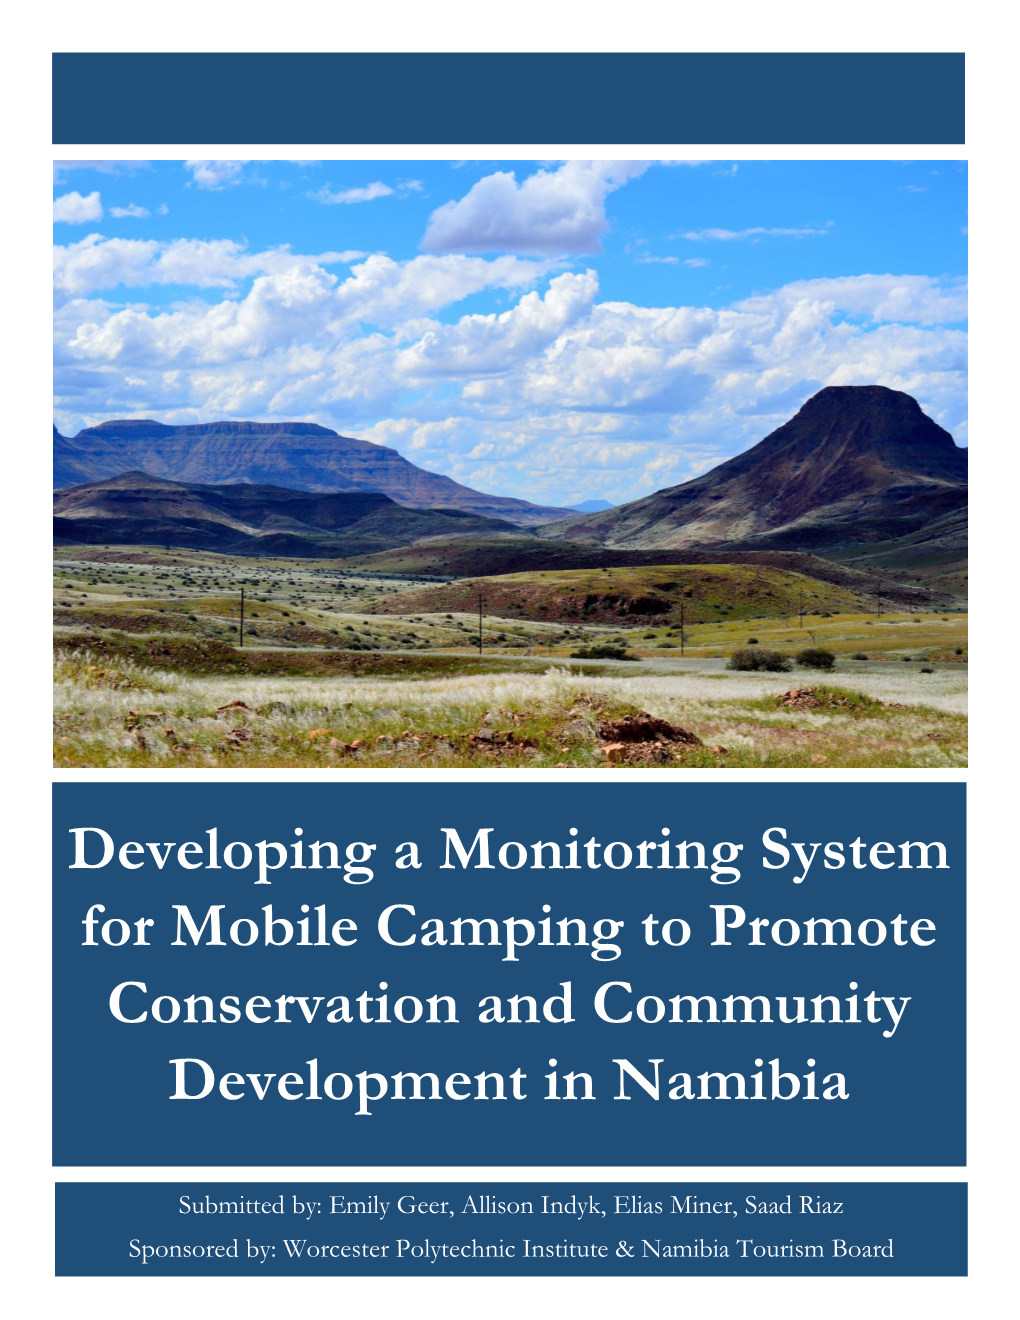 Developing a Monitoring System for Mobile Camping to Promote Conservation and Community Development in Namibia